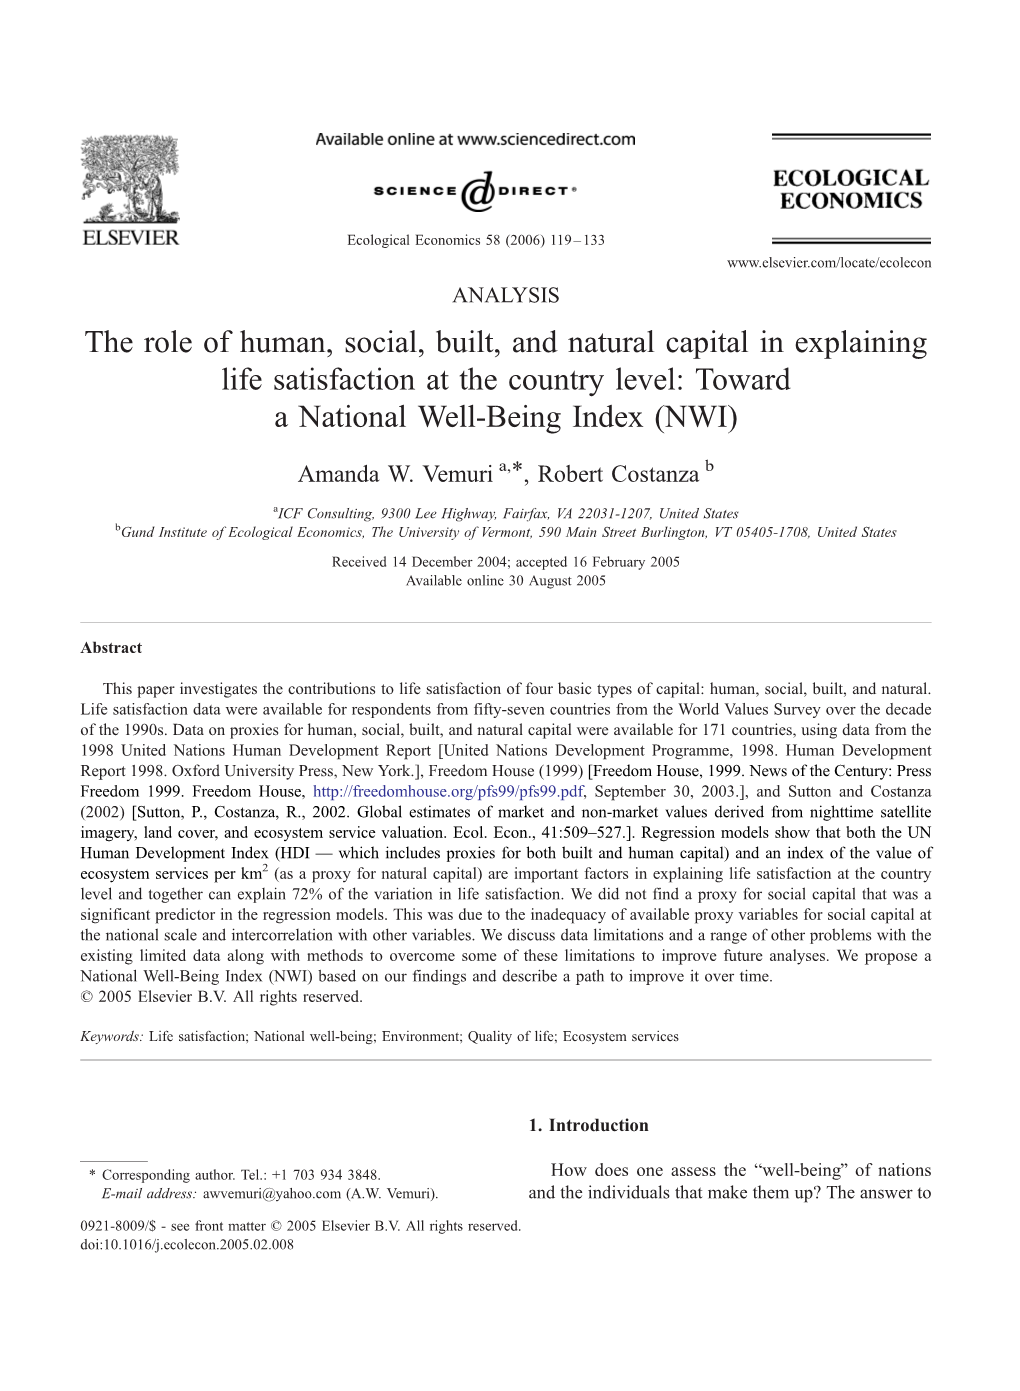 The Role of Human, Social, Built, and Natural Capital in Explaining Life Satisfaction at the Country Level: Toward a National Well-Being Index (NWI)